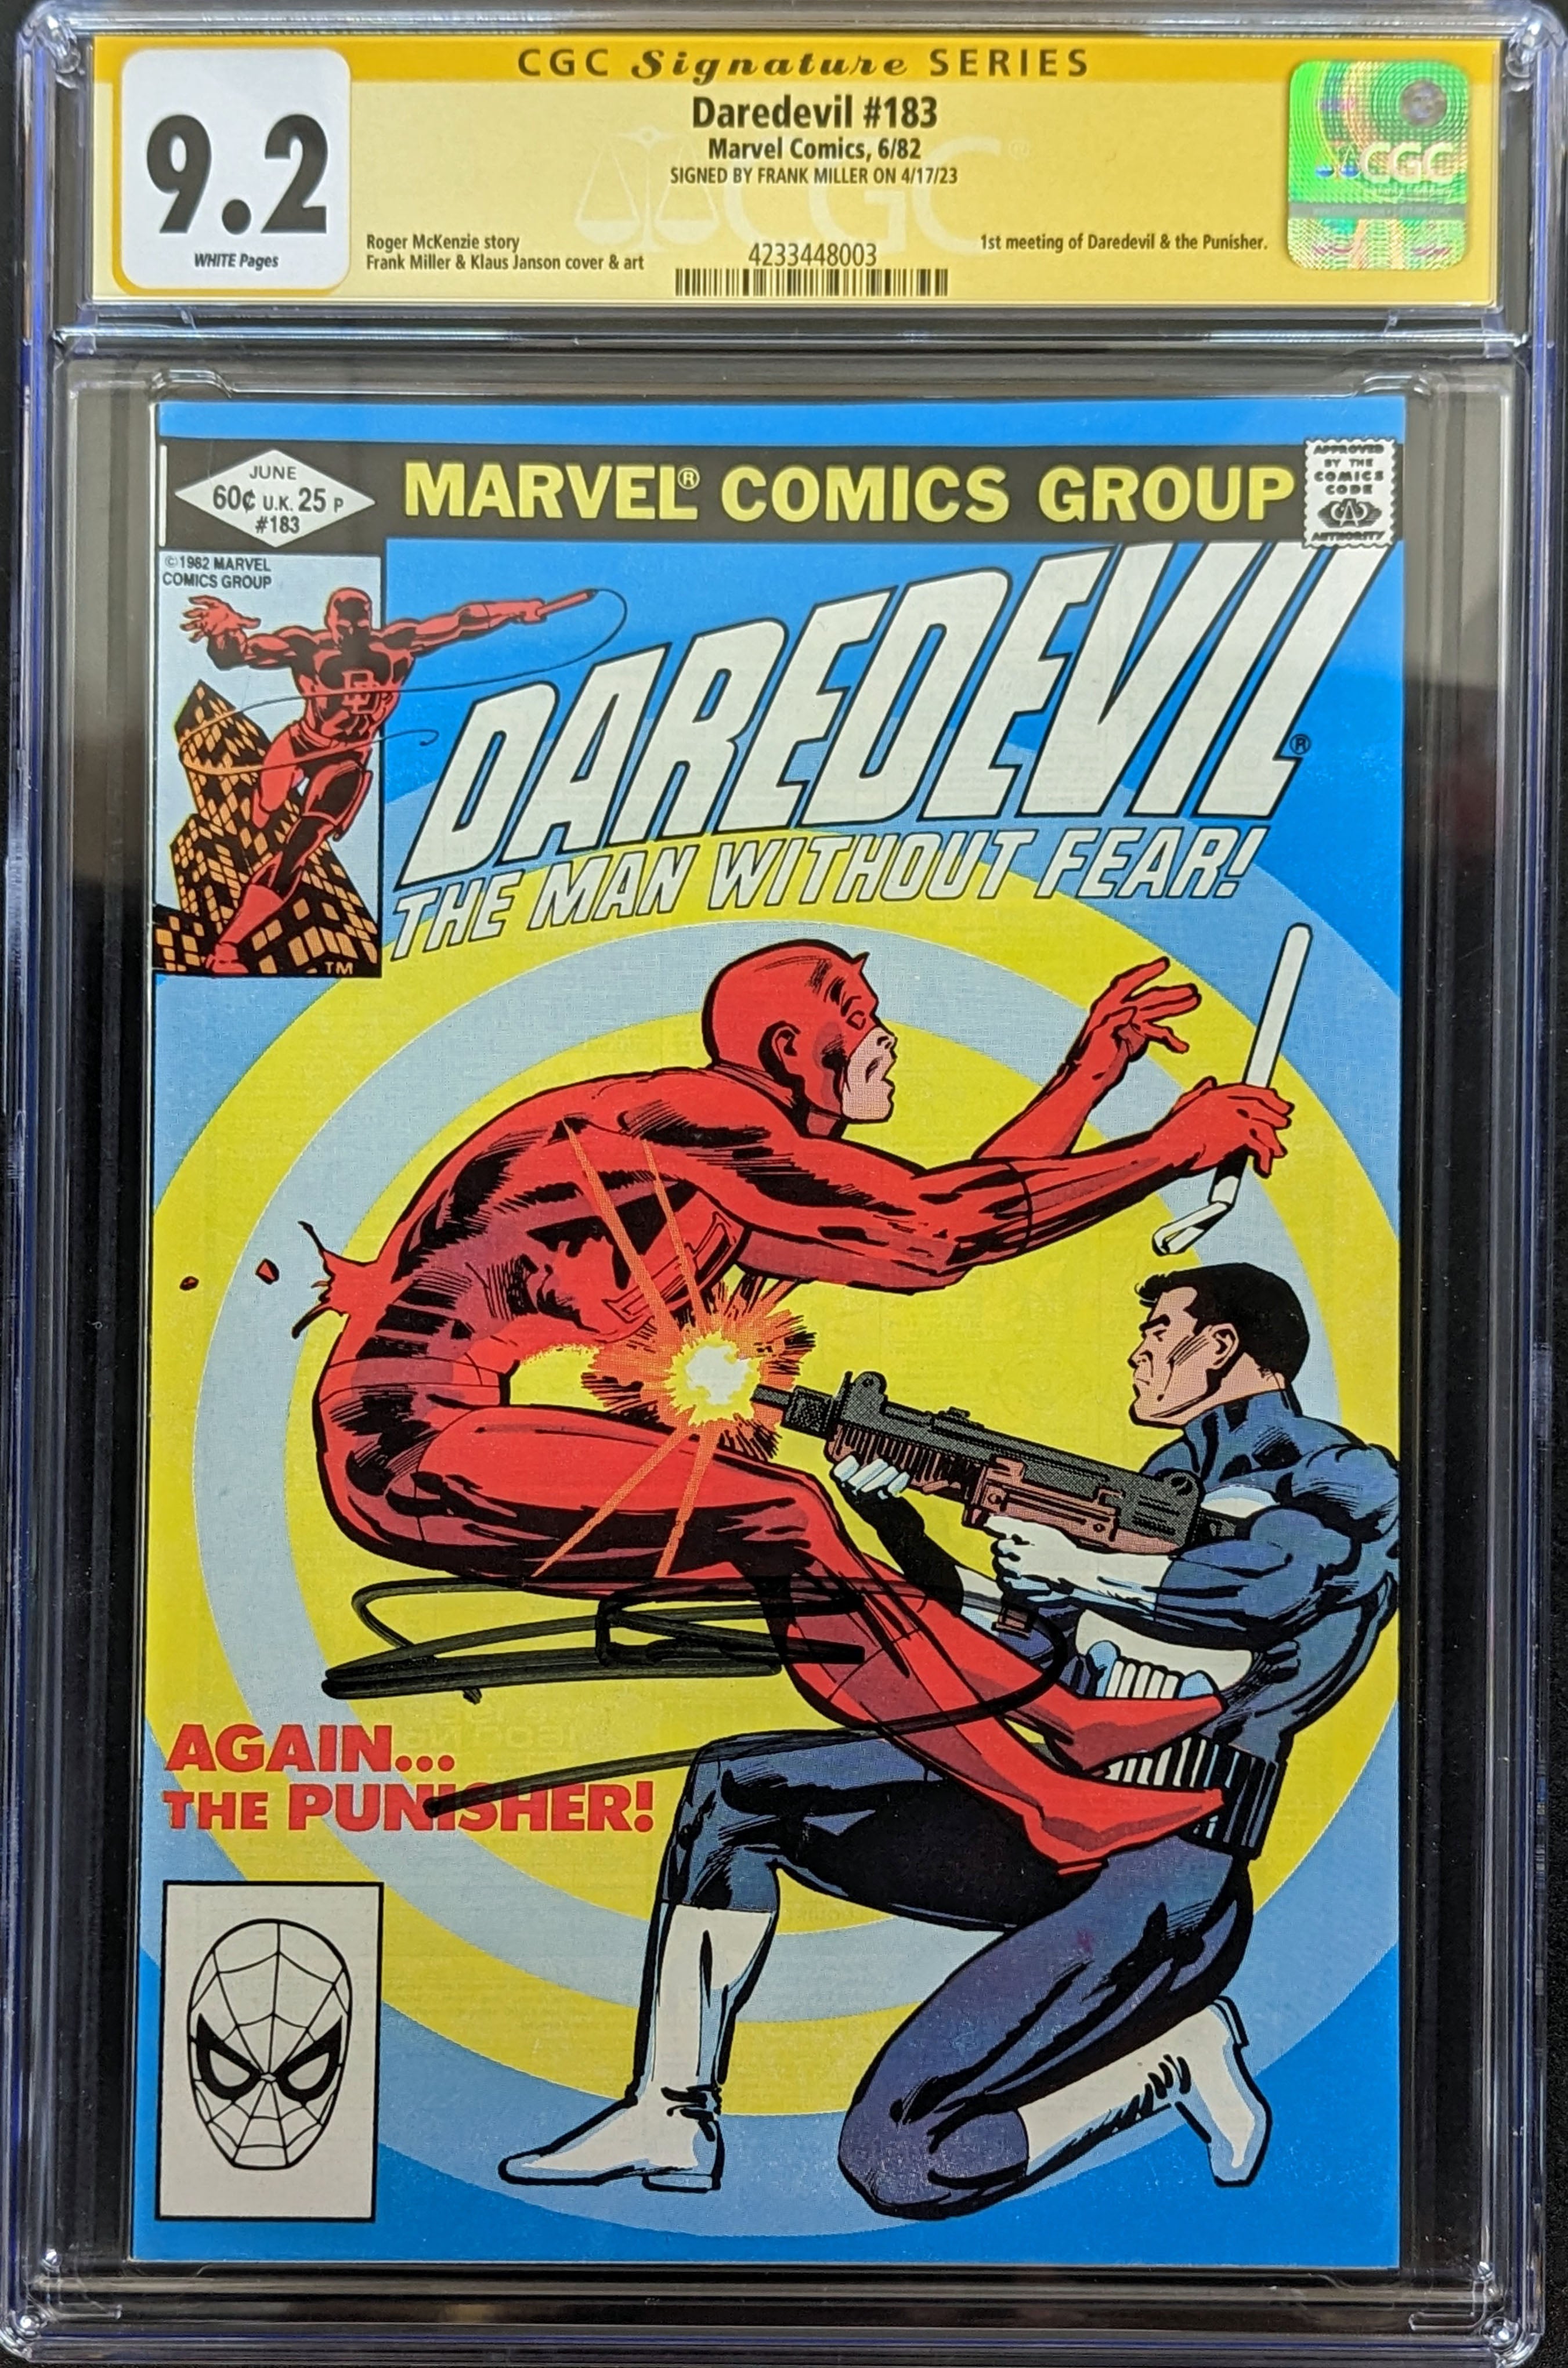 Daredevil #183 (1982) CGC 9.2 Signed by Frank Miller Punisher Appearance